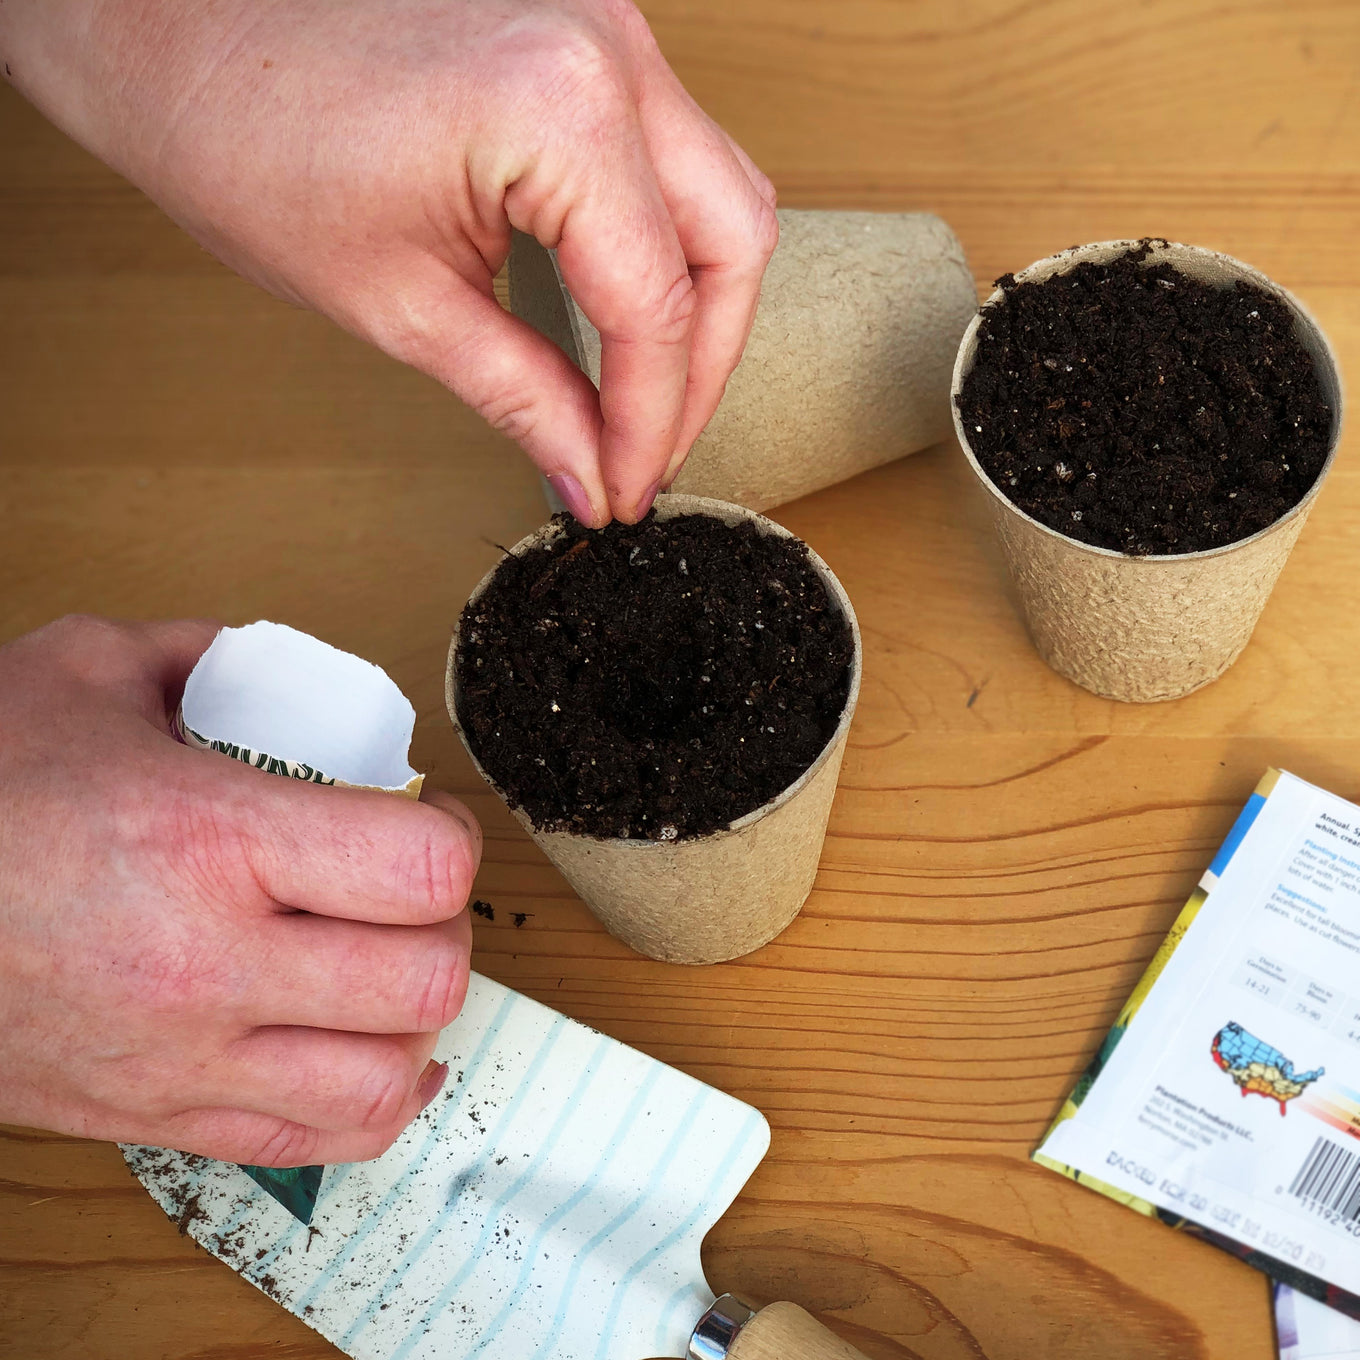 Start your Tendergreen Burpless Cucumbers in biodegradable Jiffy peat pots or paper pots for easy seedling transplanting.